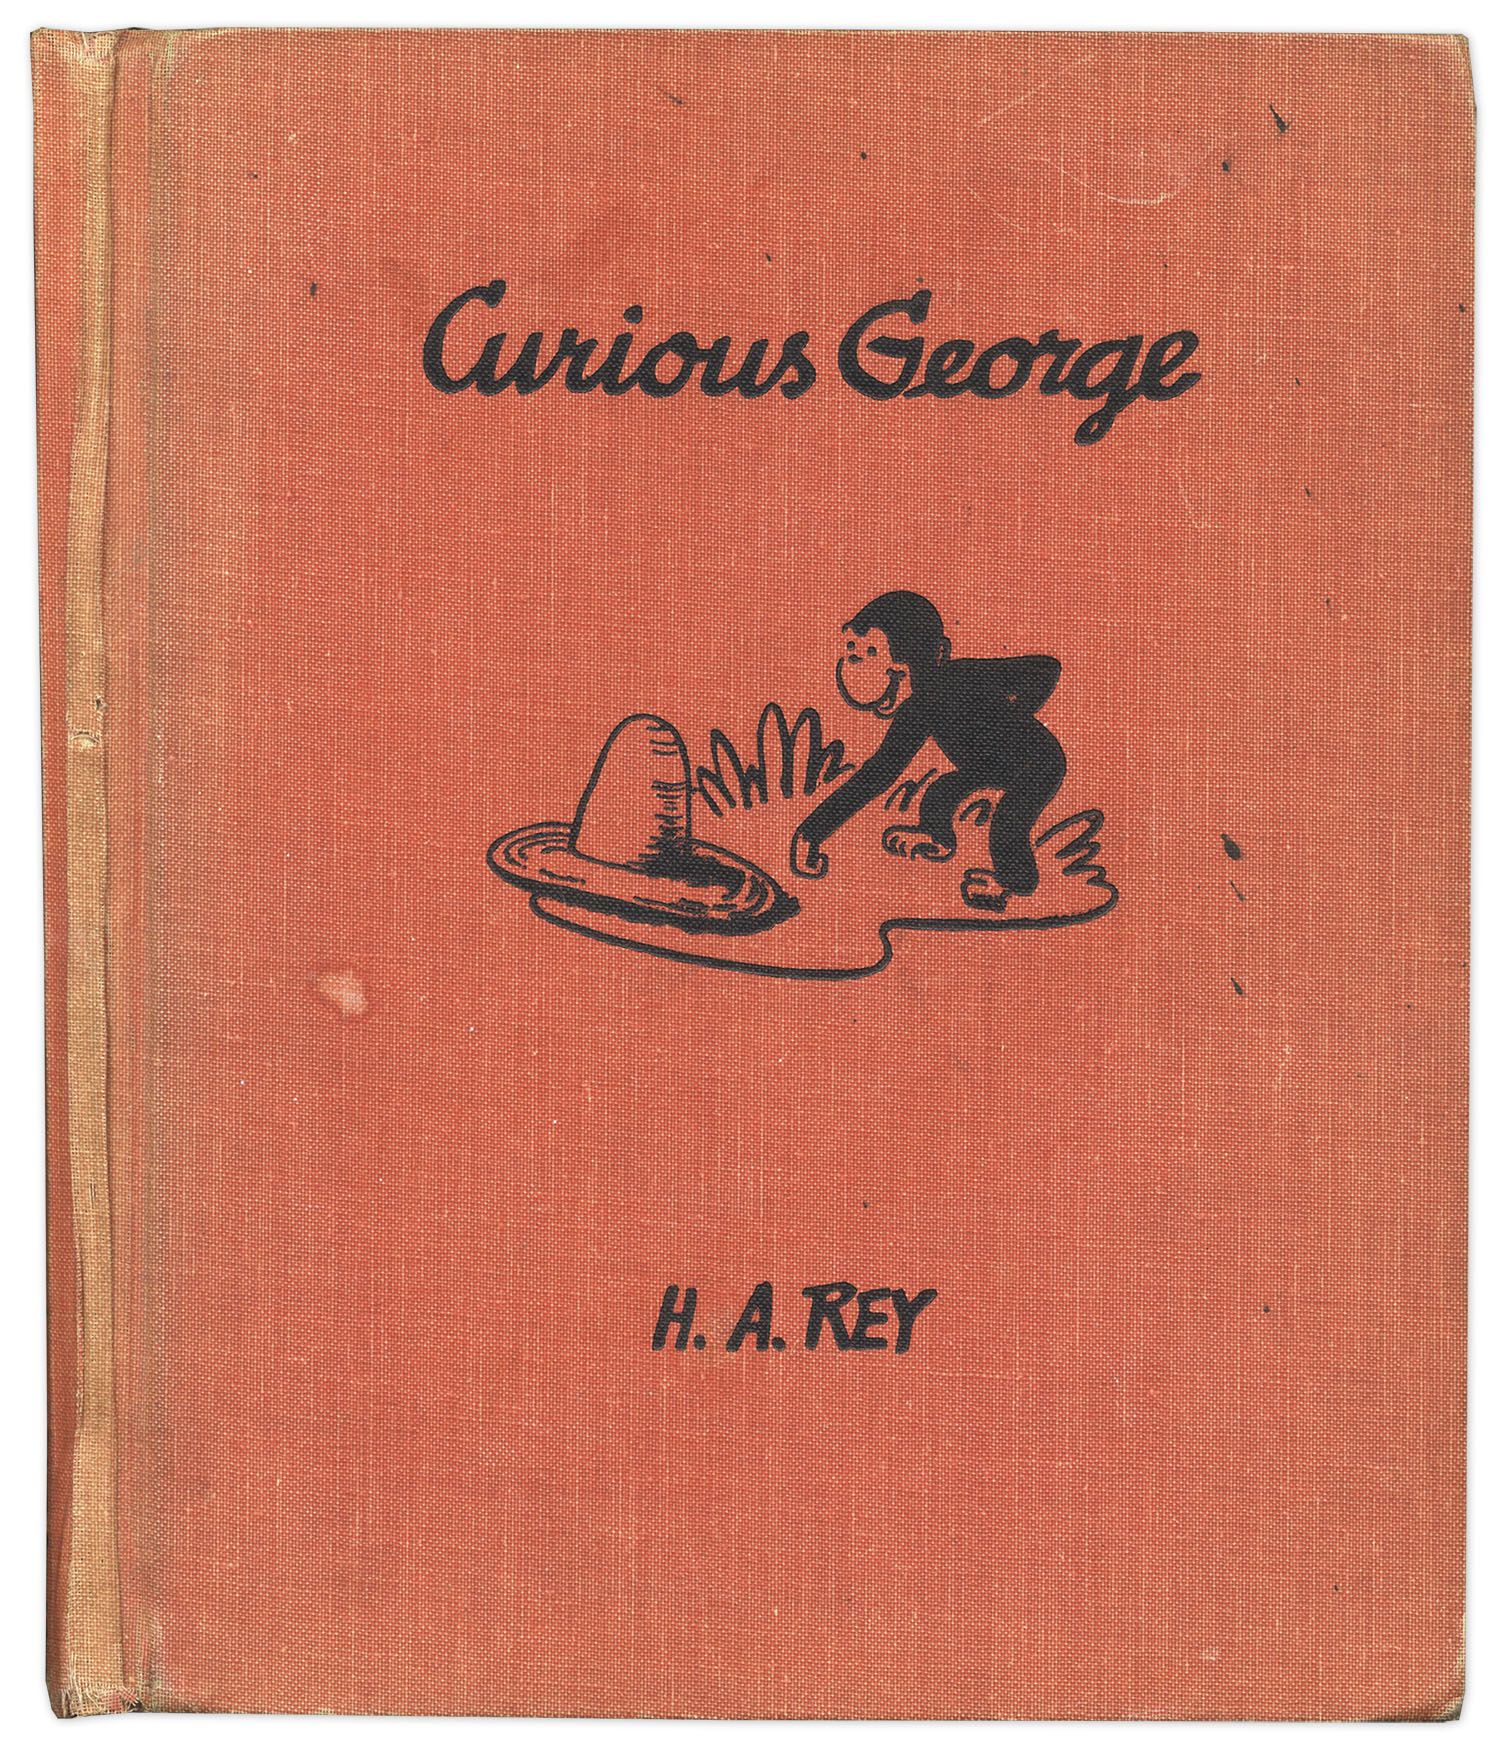 Lot Detail Curious George First Edition Signed By Ha Rey